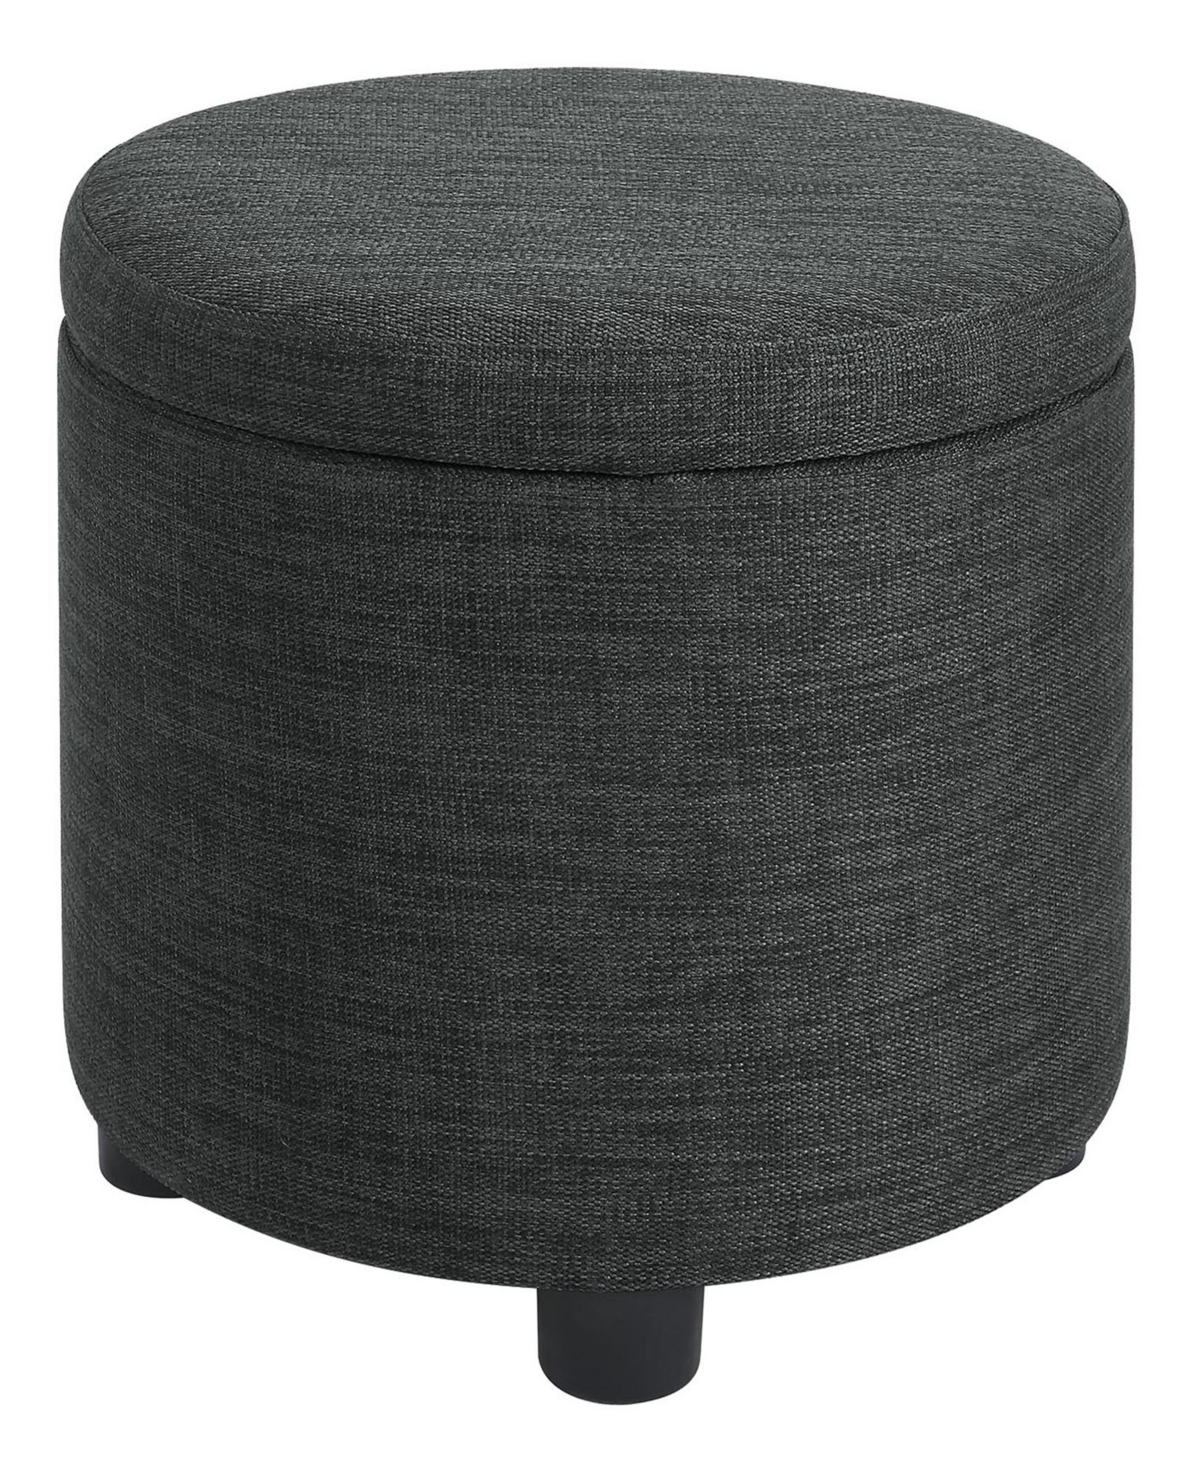 Convenience Concepts 15.75" Faux Linen Round Storage Ottoman With Tray Lid In Dark Charcoal Gray Fabric